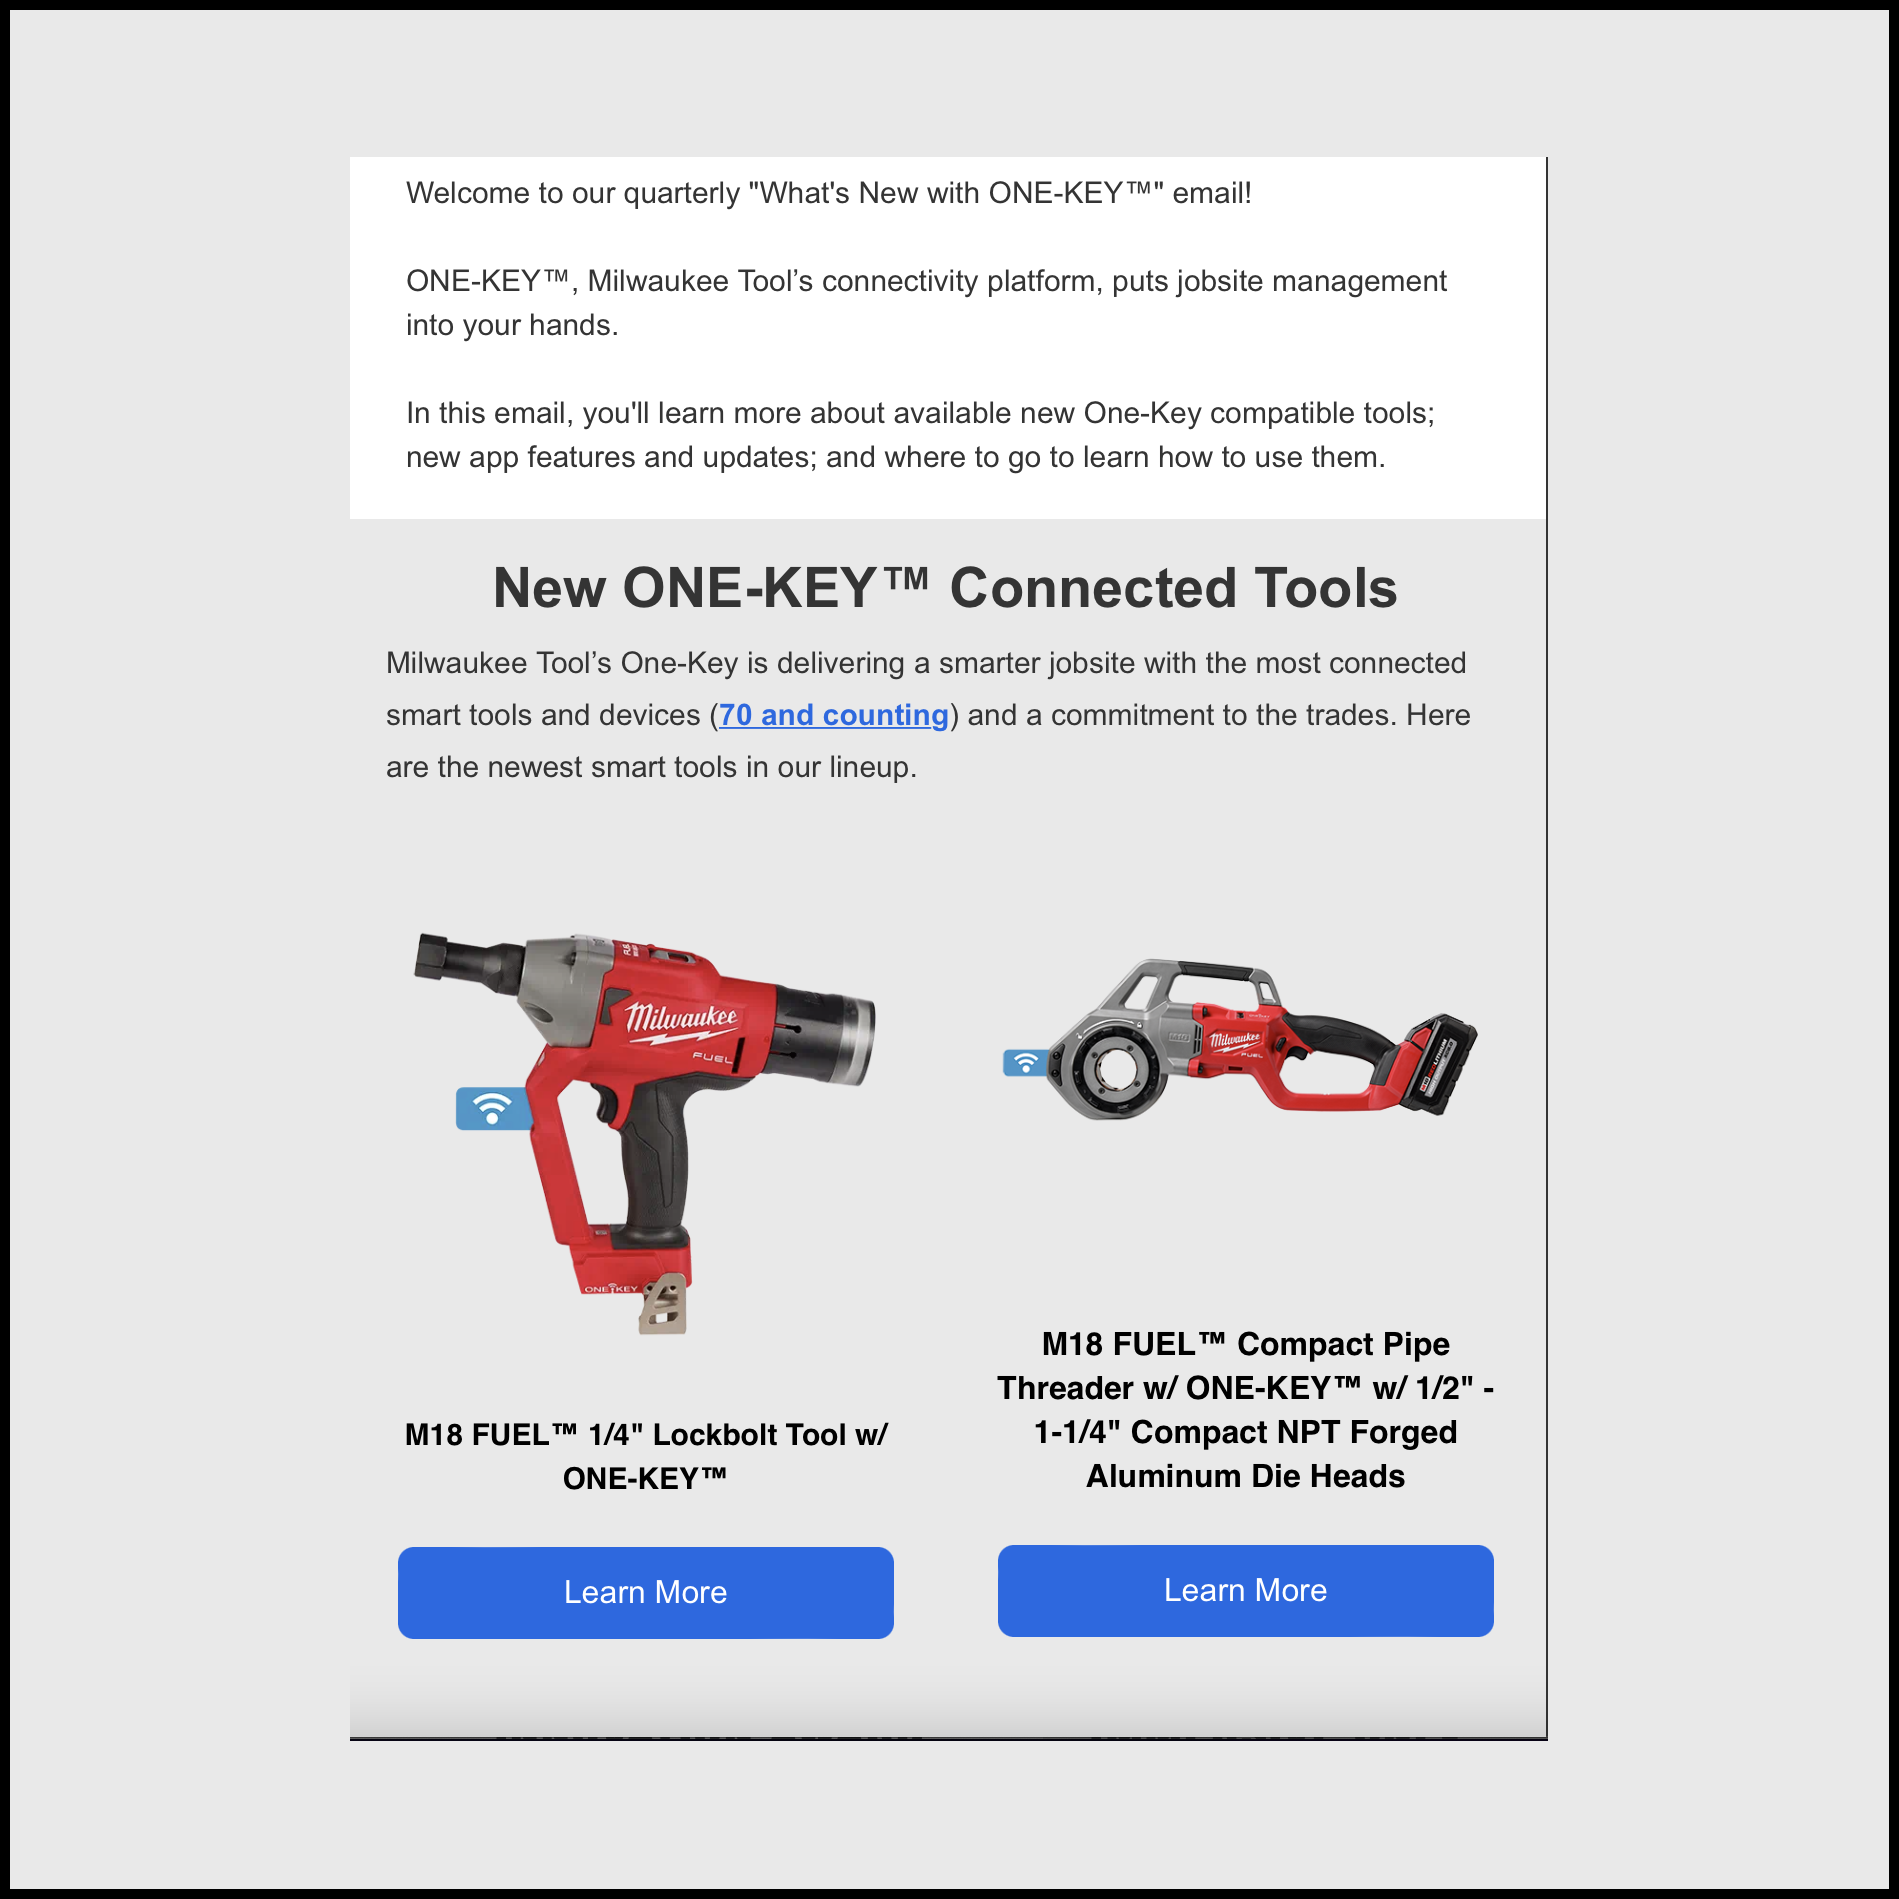 An email announcing new One-Key connected tools and features